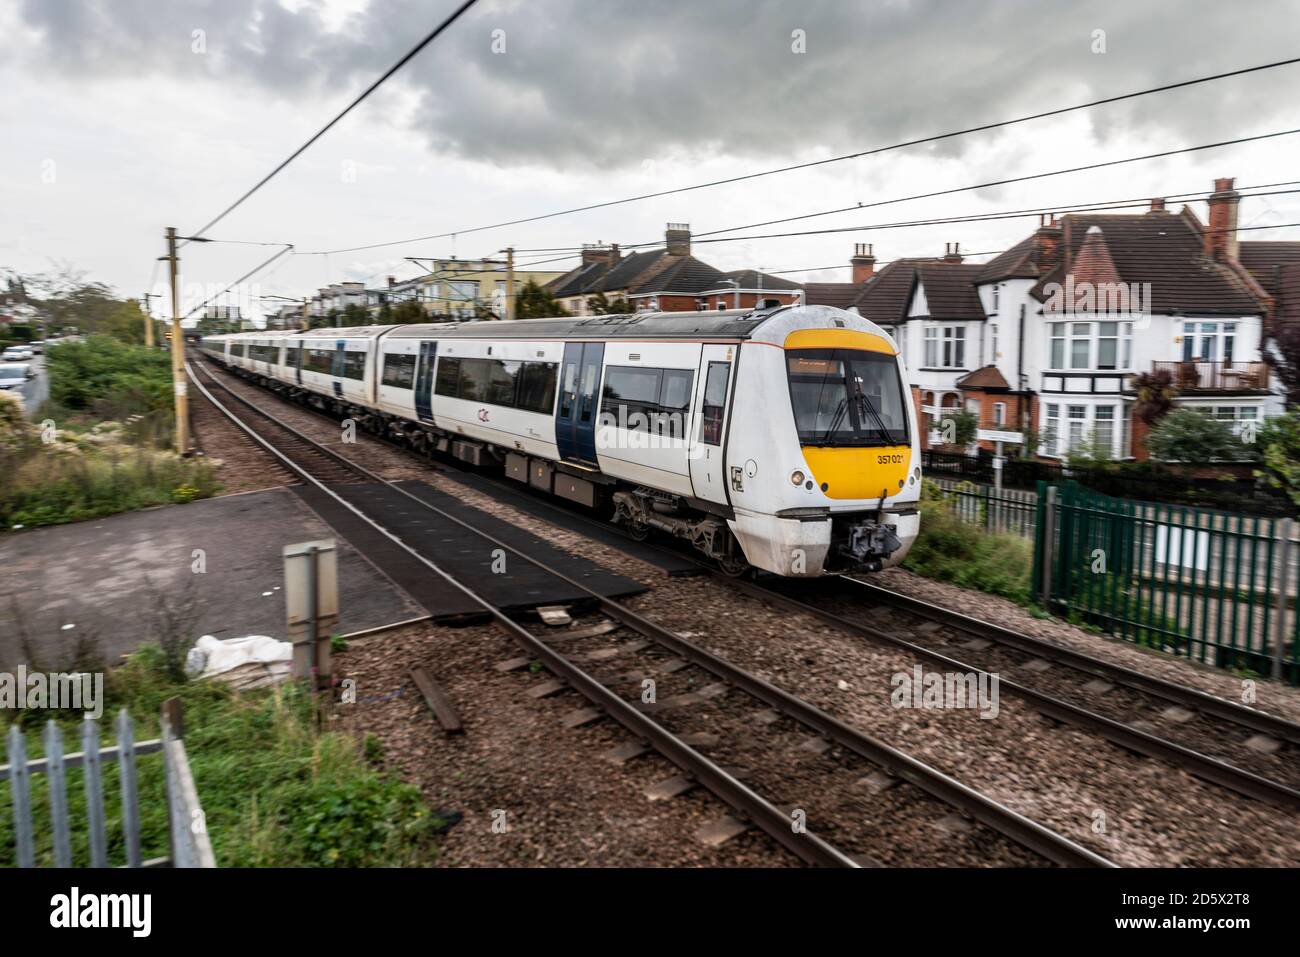 Class 357 Electrostar train on the C2C Fenchurch Street to Southend line at Westcliff on Sea, Essex, UK. Crossing a level crossing at Crowstone Road Stock Photo